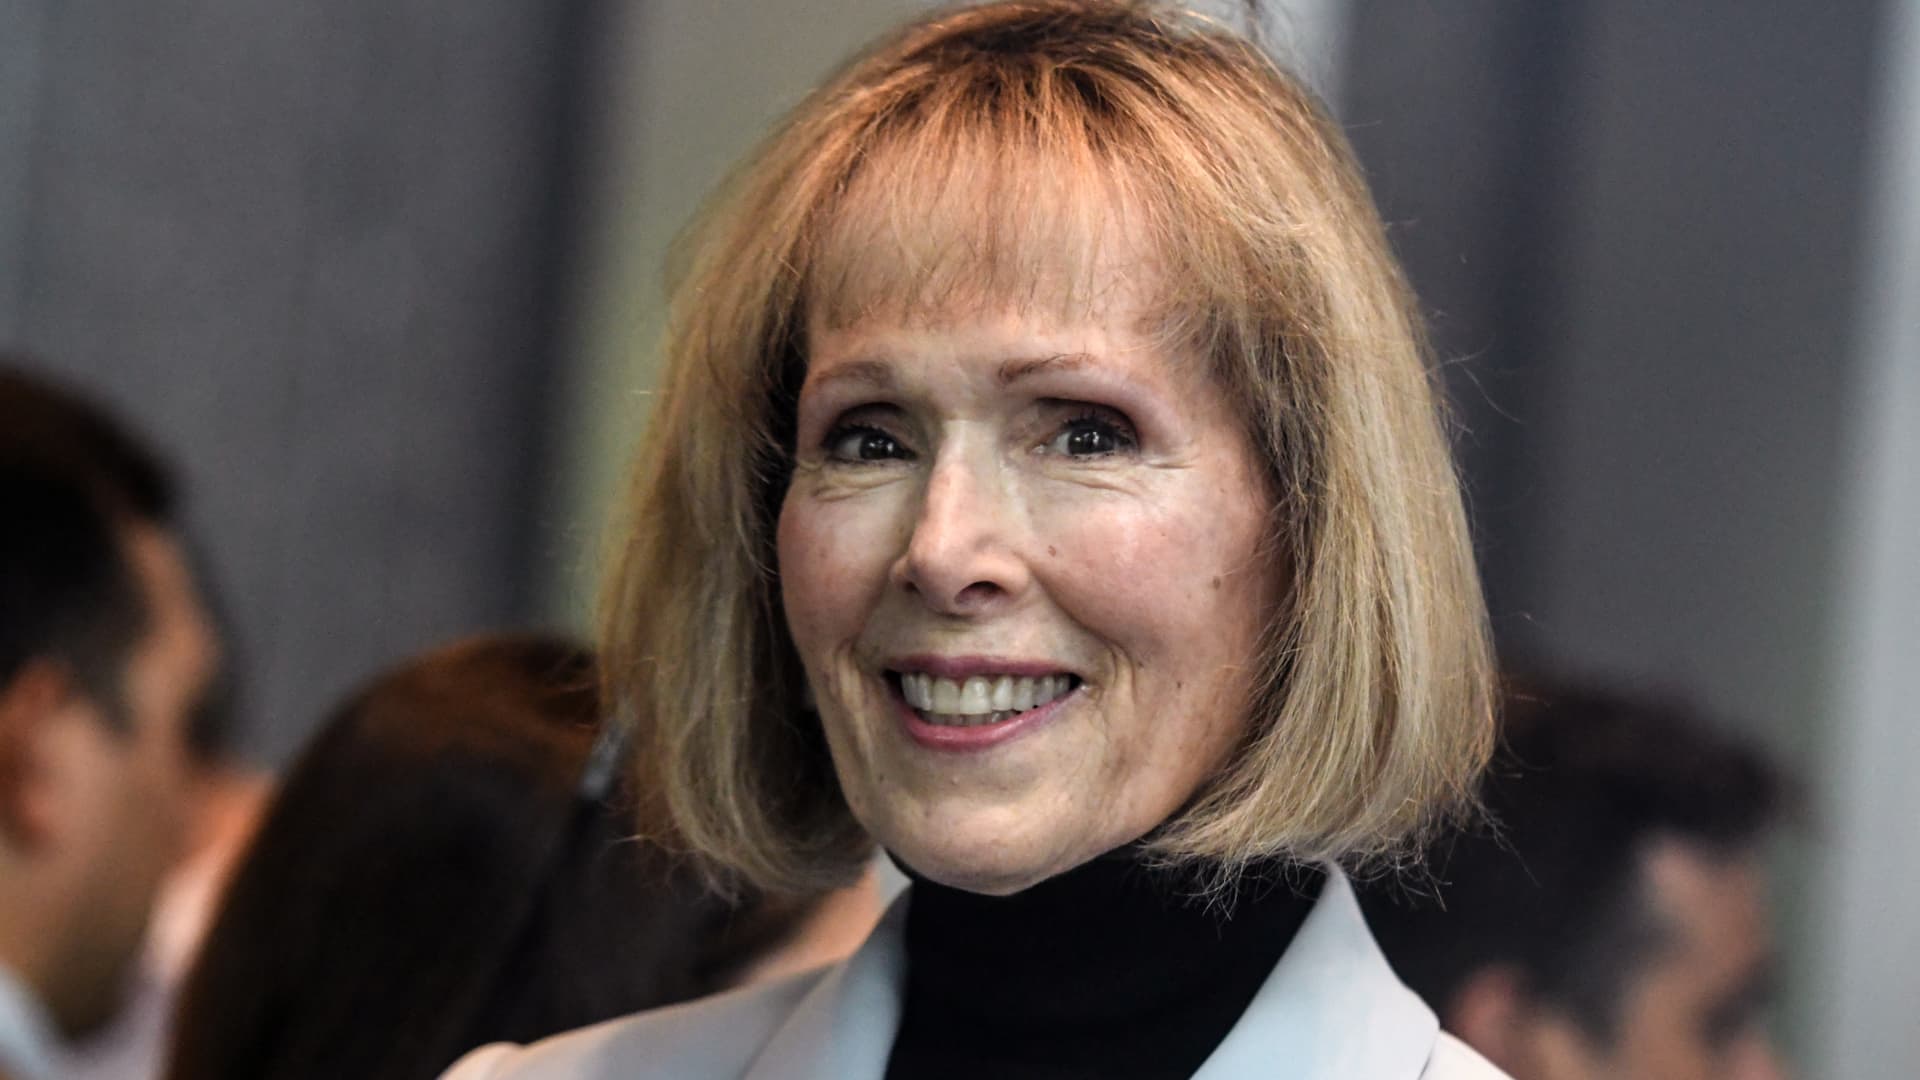 Trump's Legal Setbacks Continue: $83 Million Judgment Upheld in Defamation Suit by E. Jean Carroll